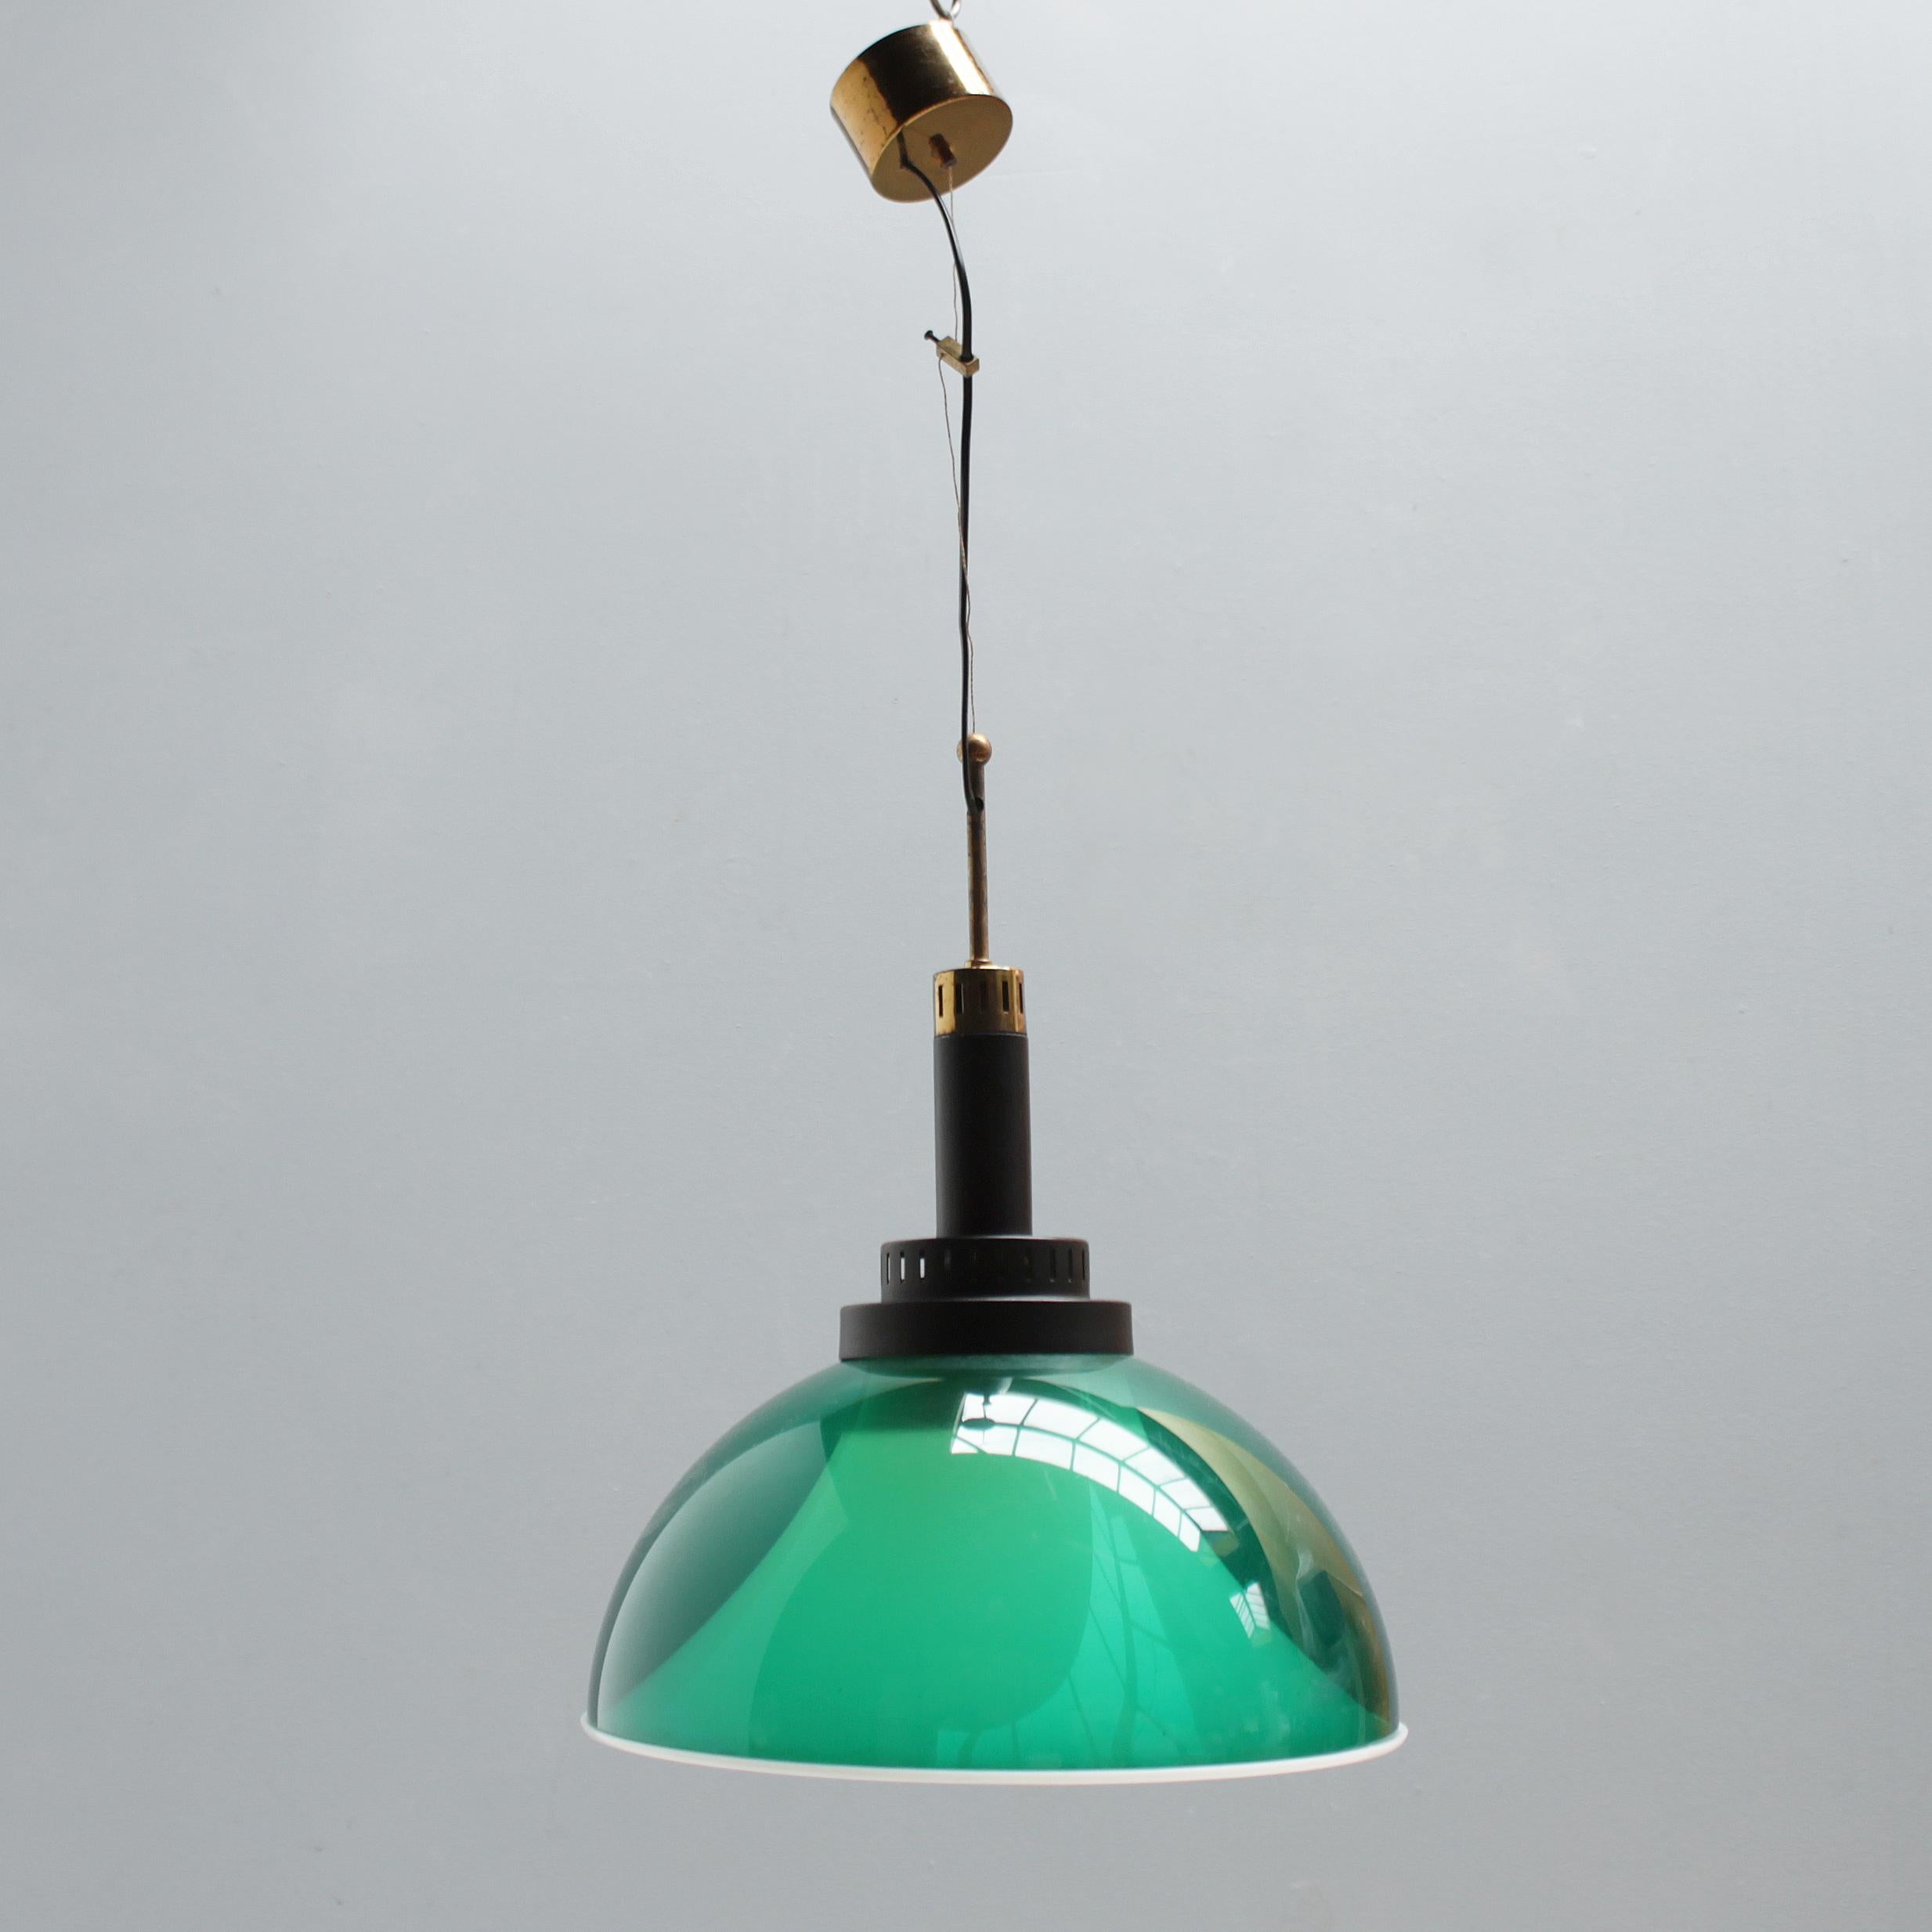 Italian Perspex lamp by Stilux, Italy. Period 1950-1959. Materials: plastics (Perspex), brass and lacquered metal. Good vintage condition.
Dimensions: Height 19.7 in. (50 cm), diameter 15.8 inches (40 cm).
One bulb E27/E26 of max 40 watt, the